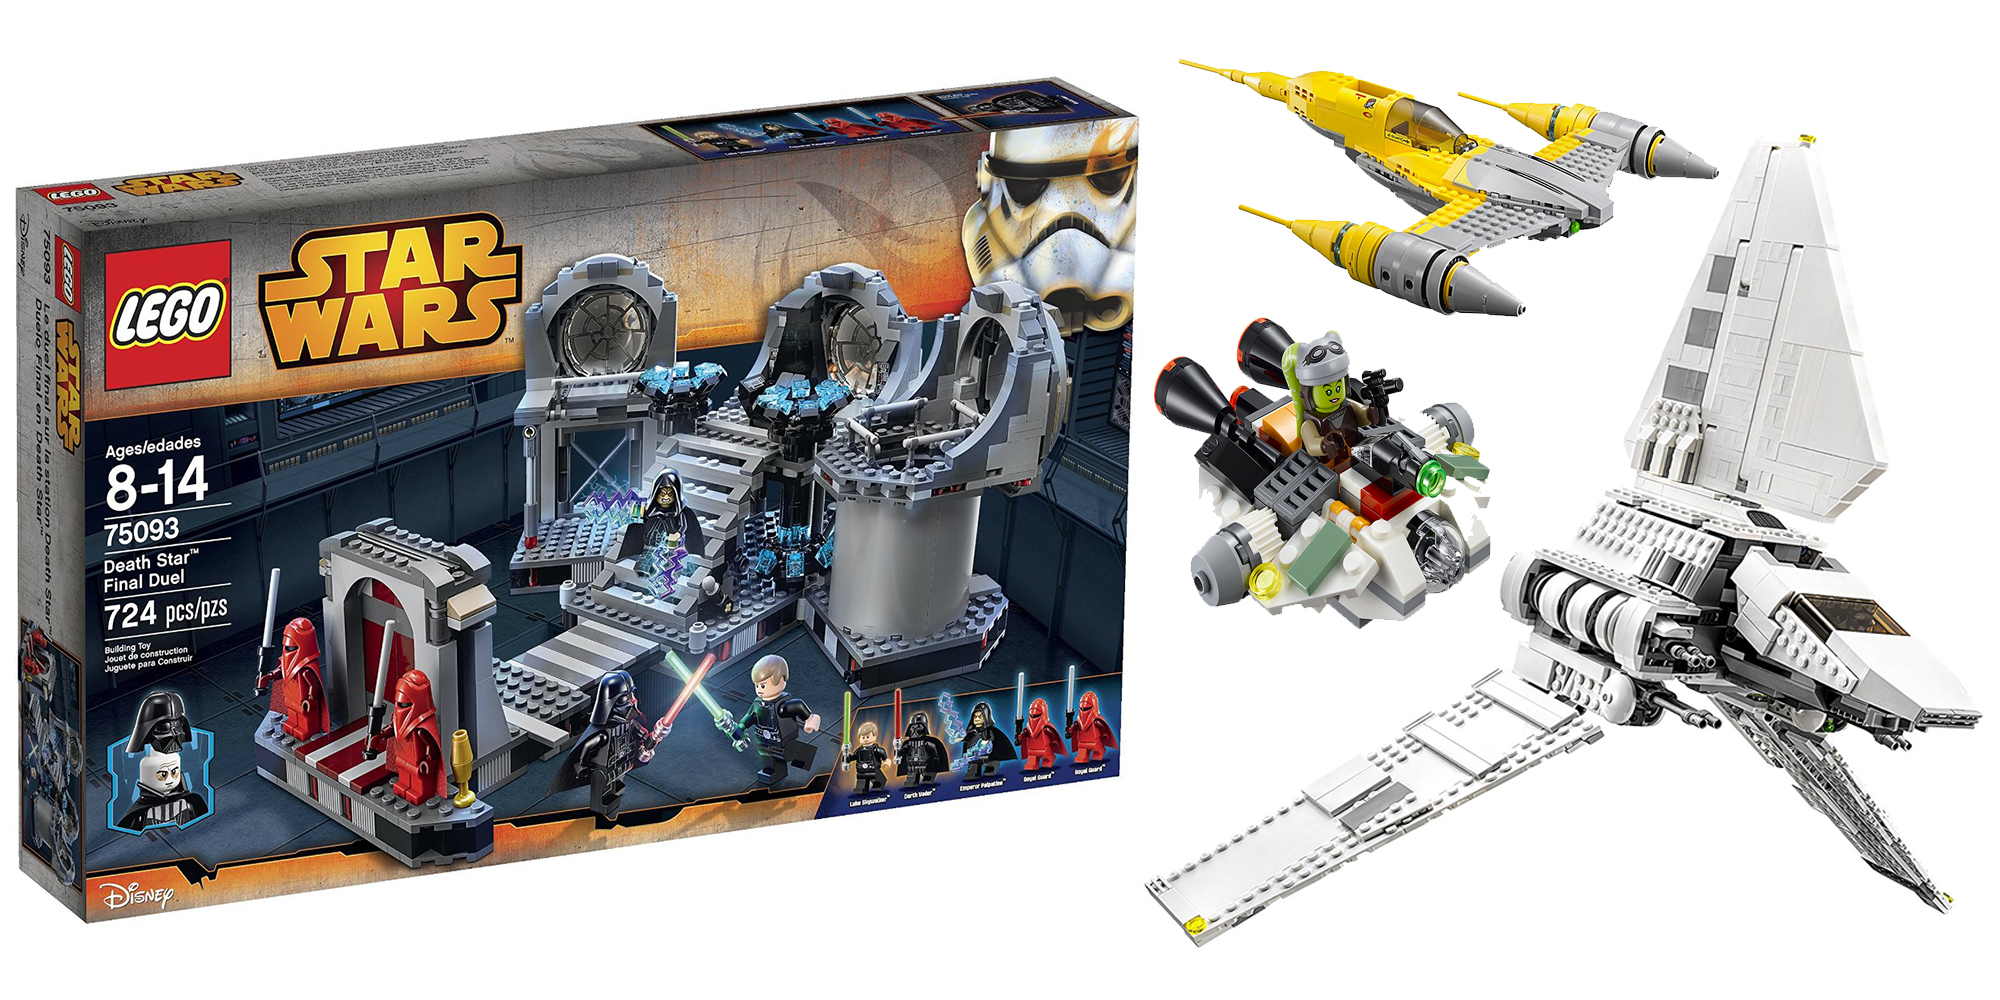 Best Star Wars LEGO sets and items that are $50 and under